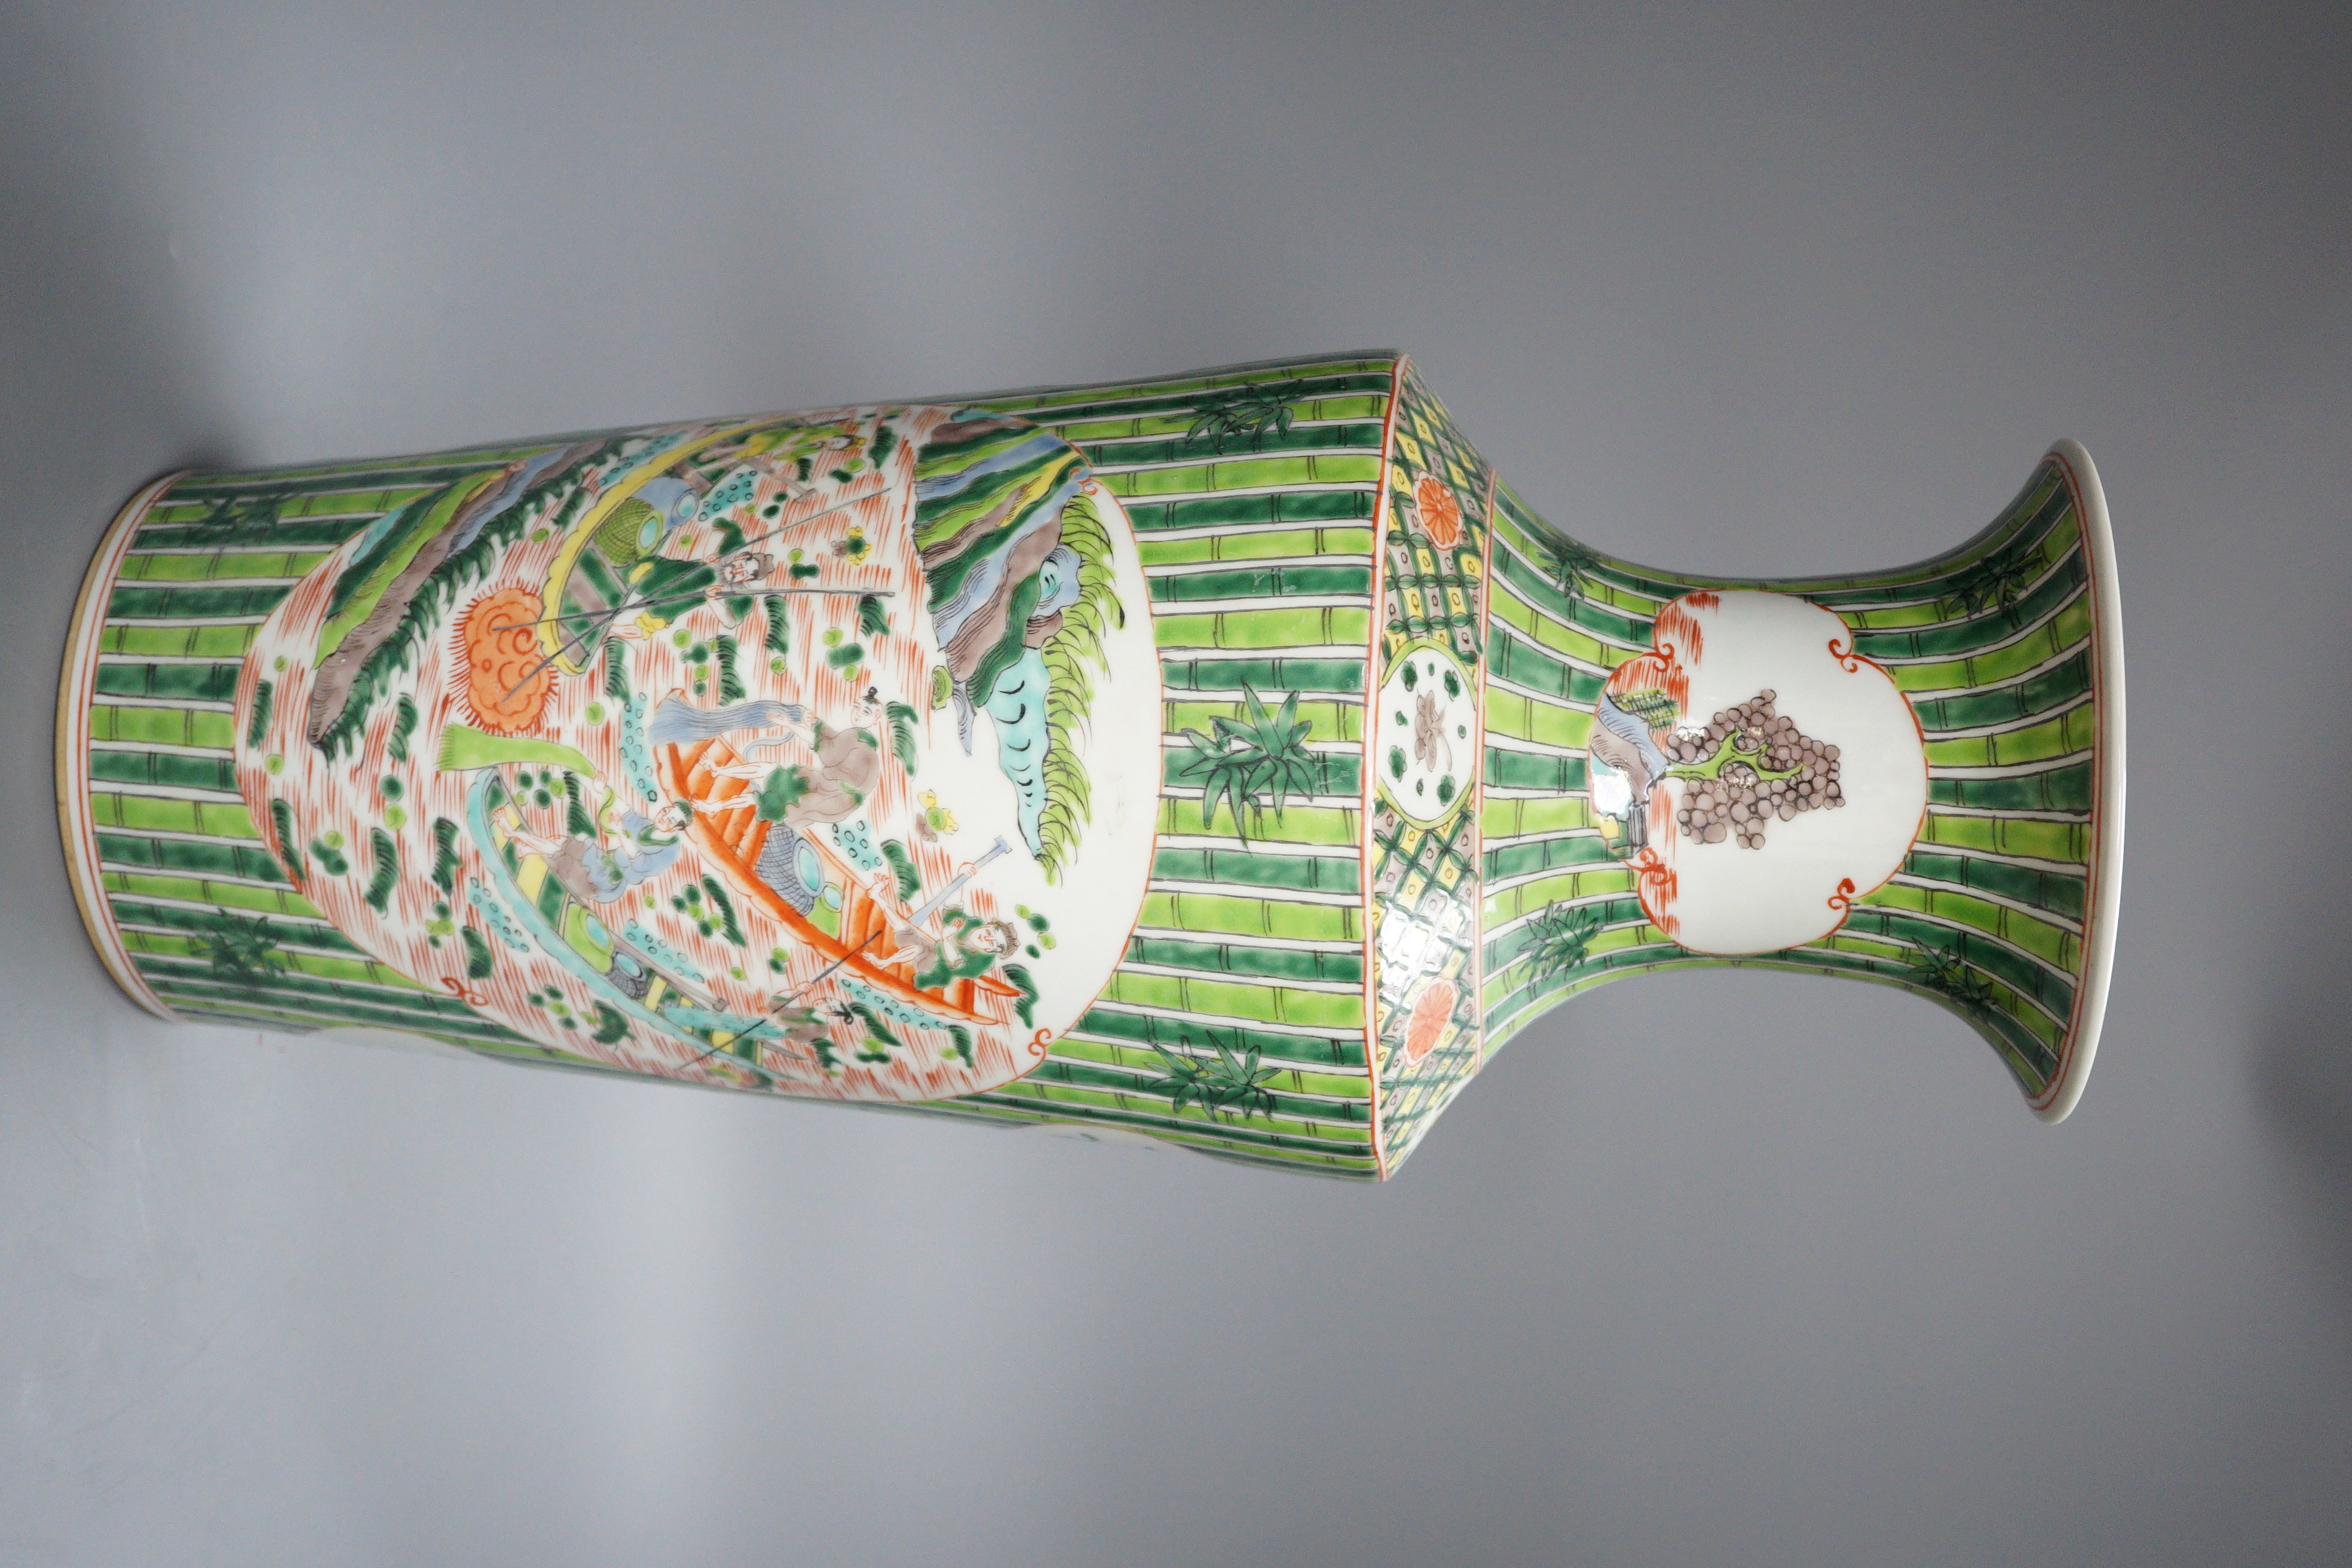 A 20th century Chinese figural vase, 44cm - Image 3 of 5